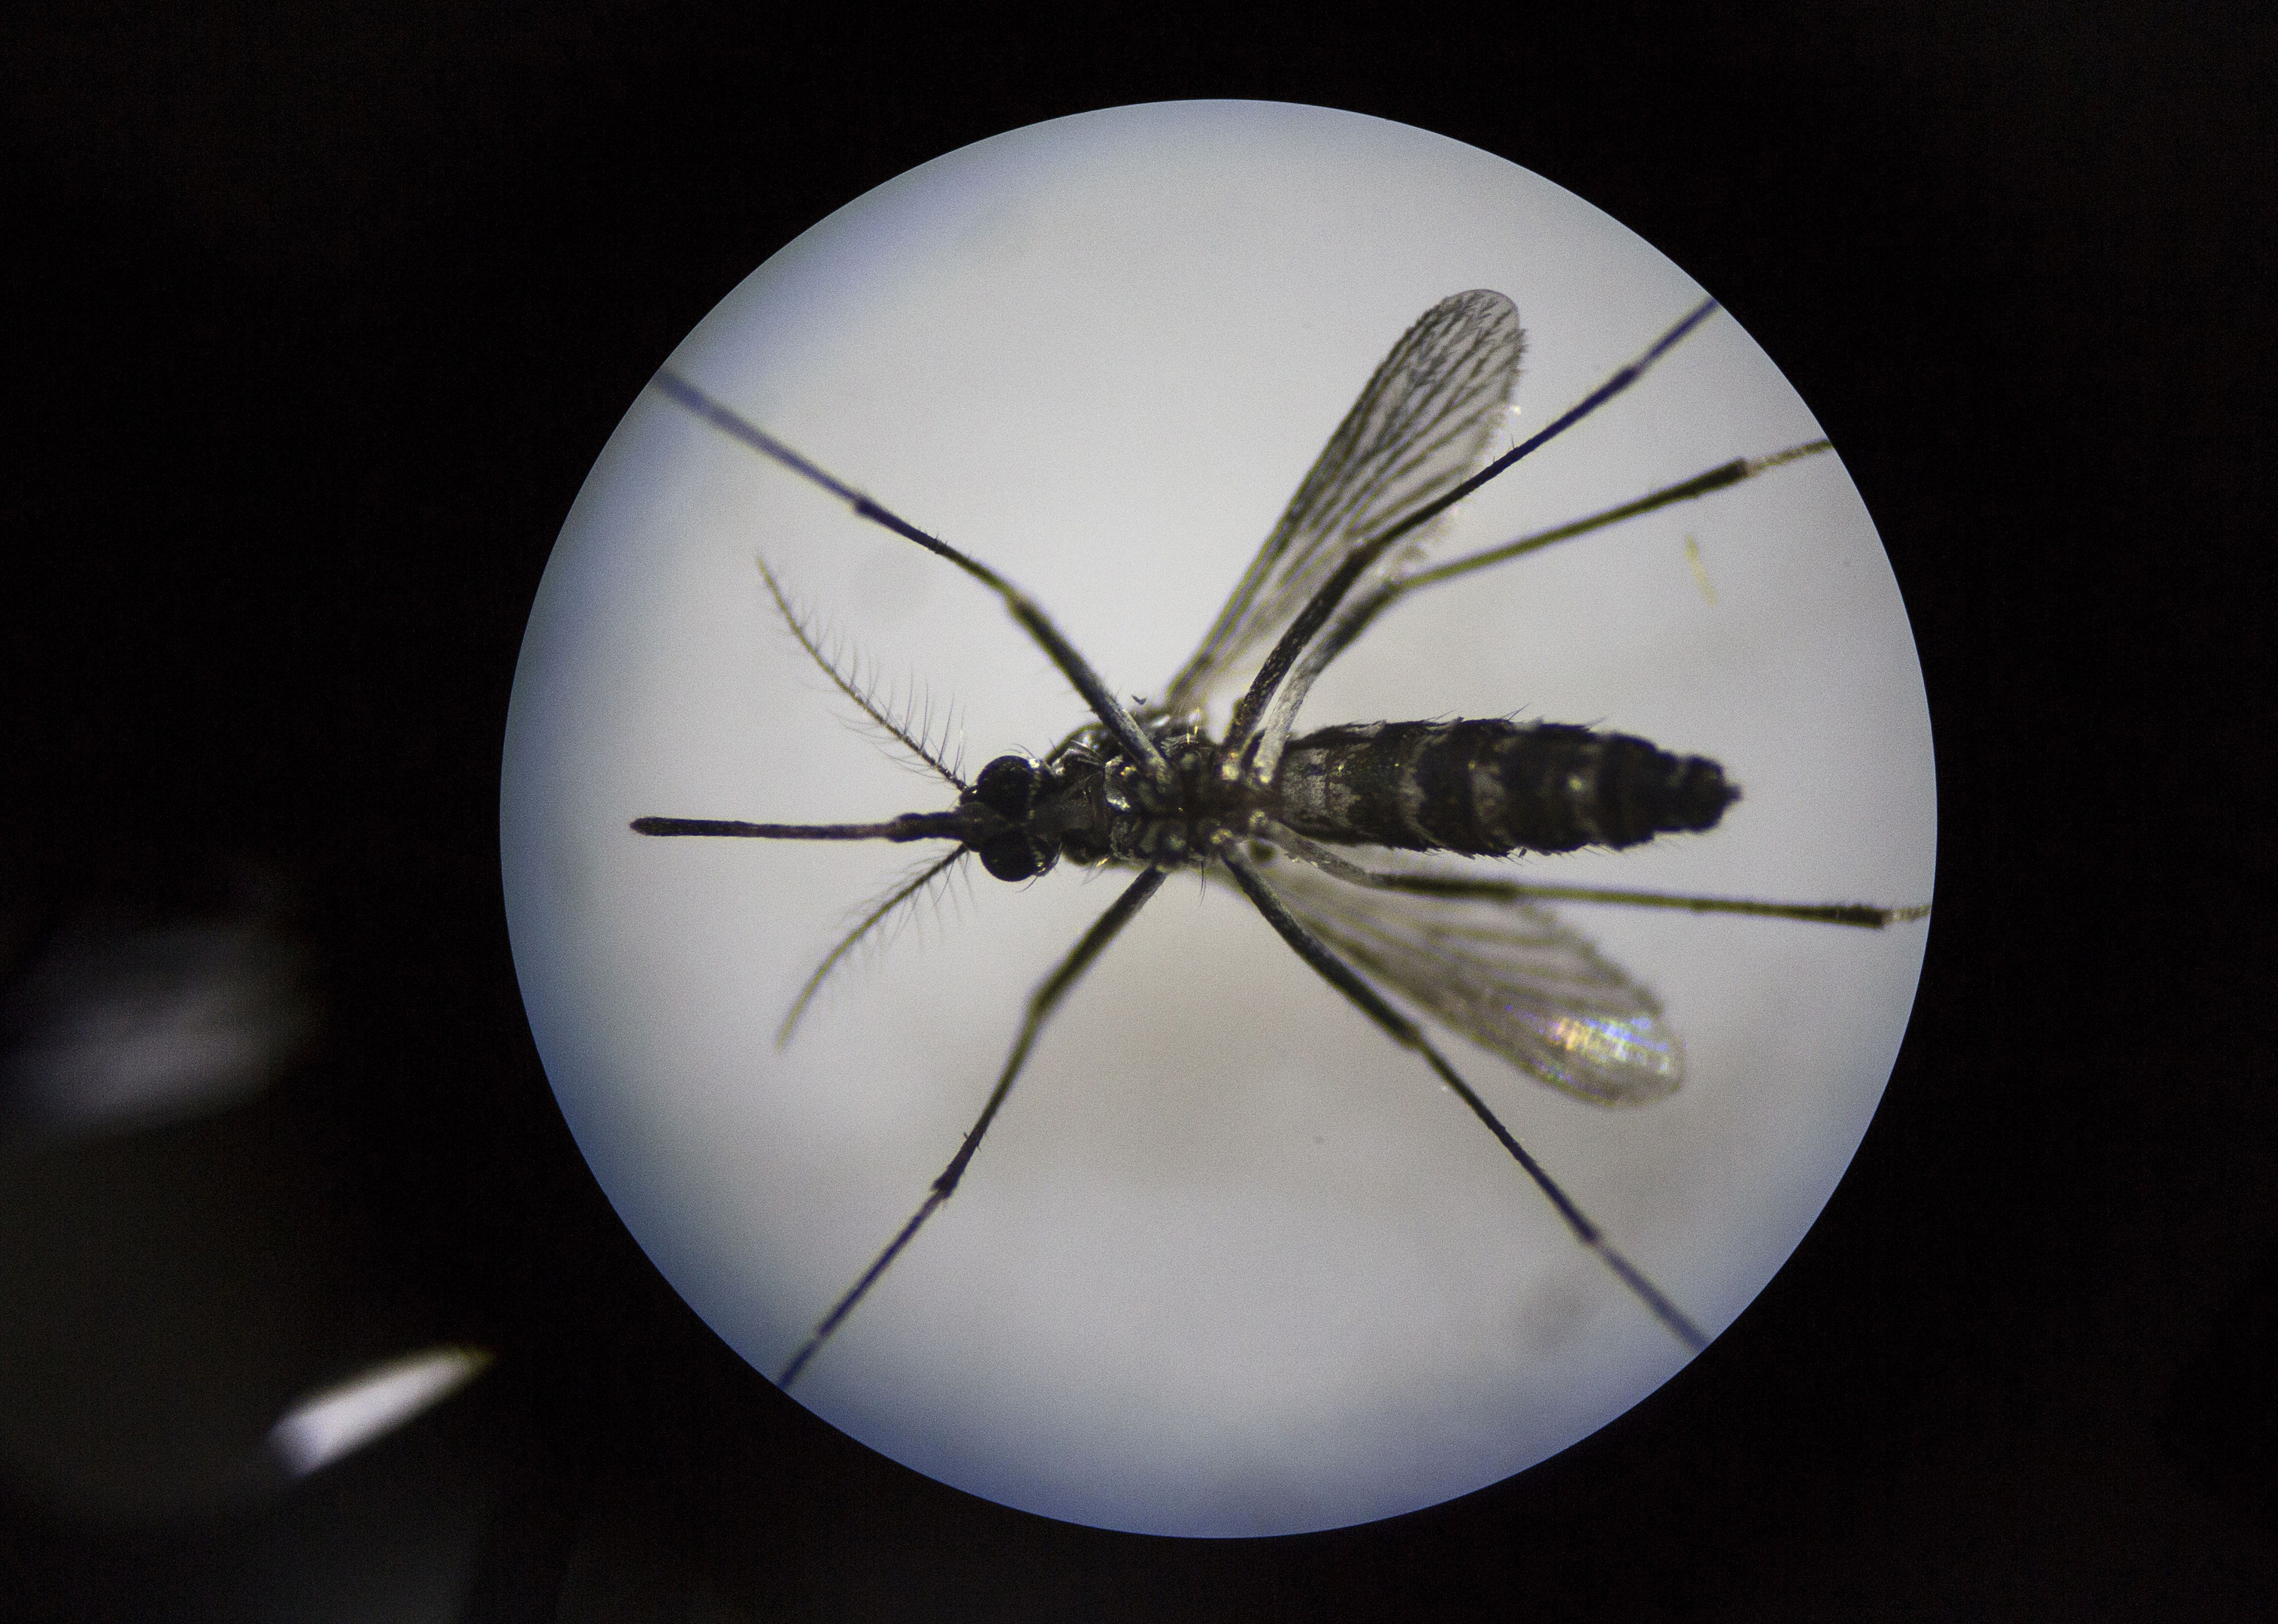 Killing the parasite that causes malaria rather than mosquitoes could help eliminate the disease.